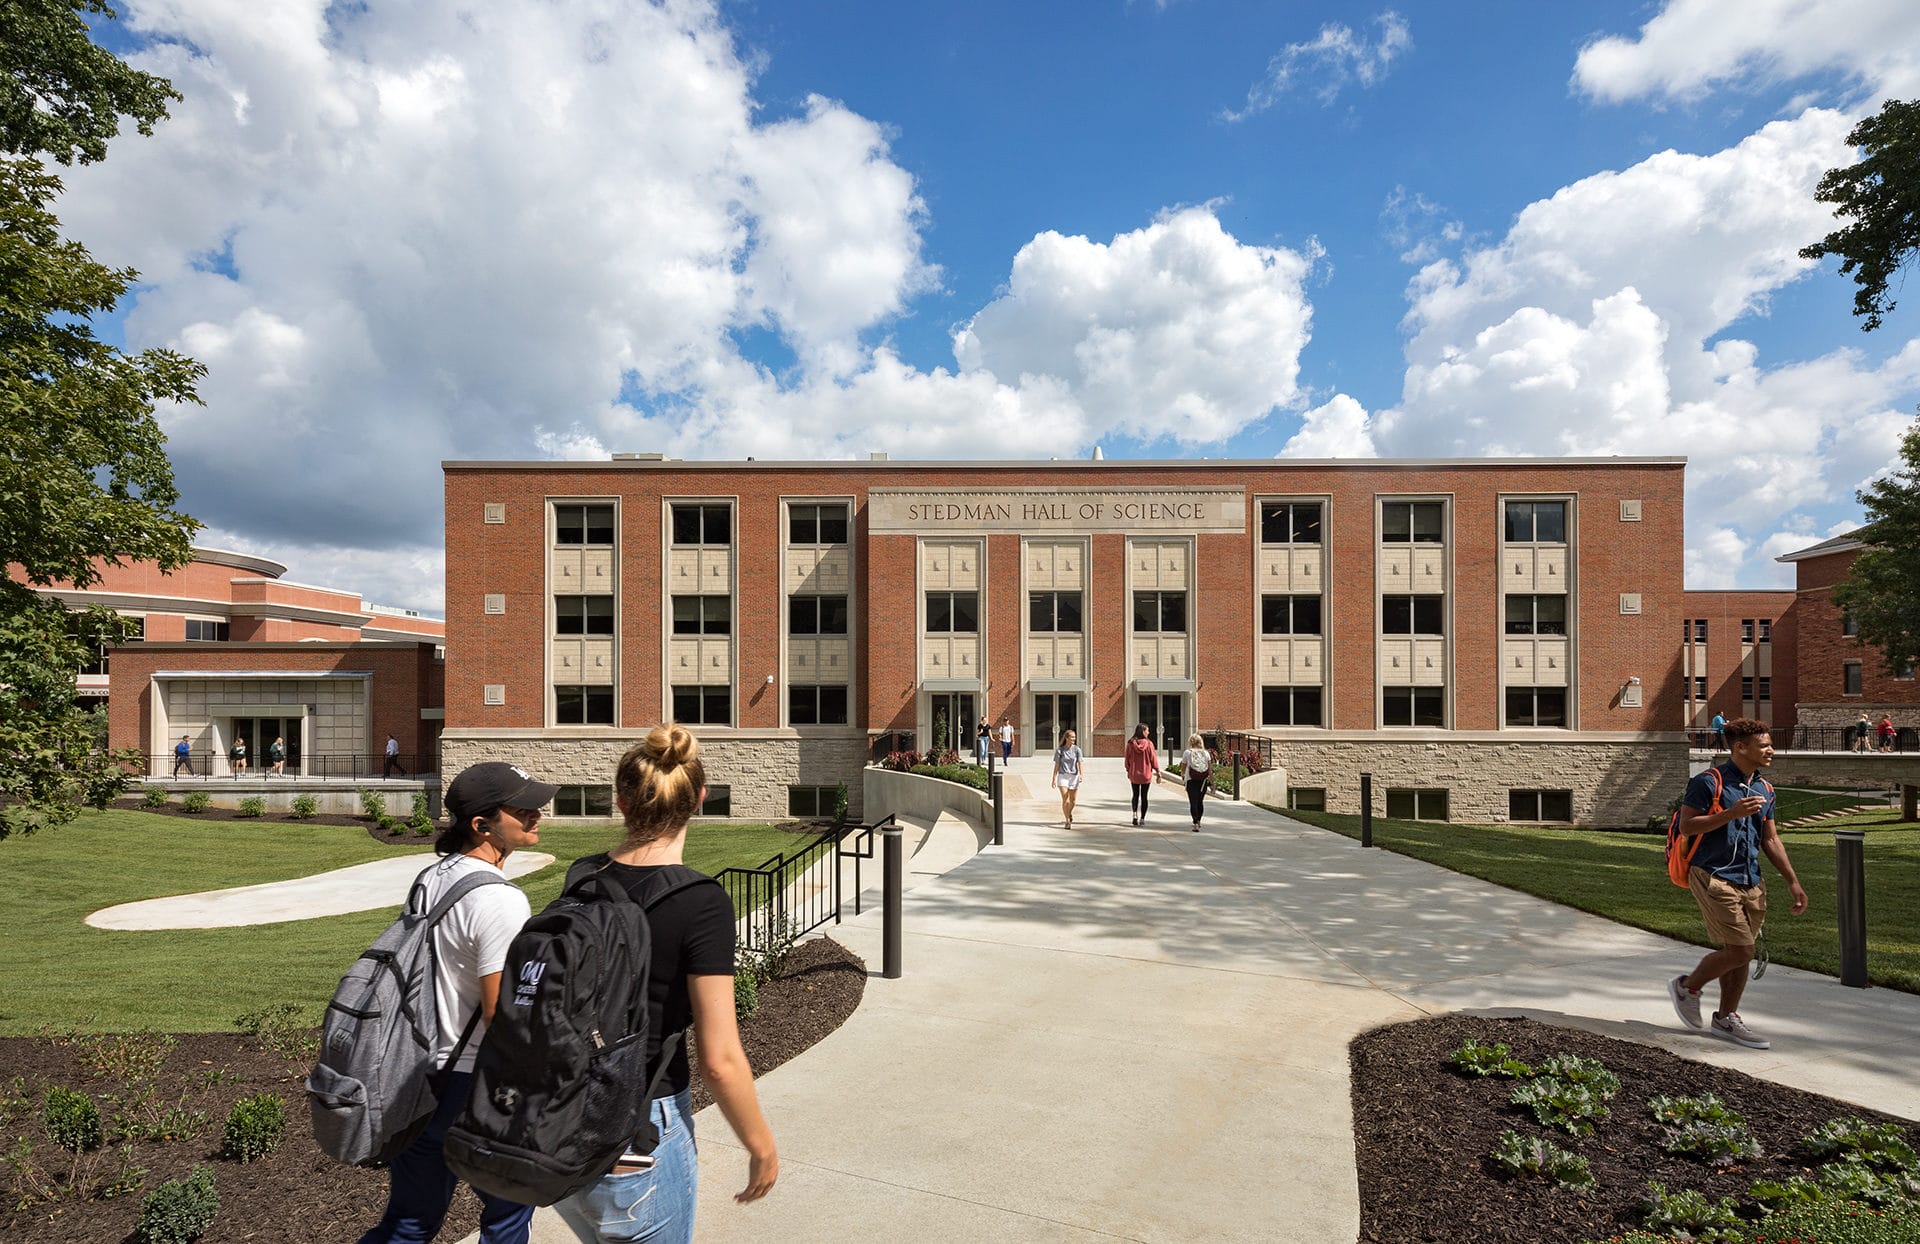 exterior of central methodist university stedman science building renovated by trivers architectural firm in st. louis